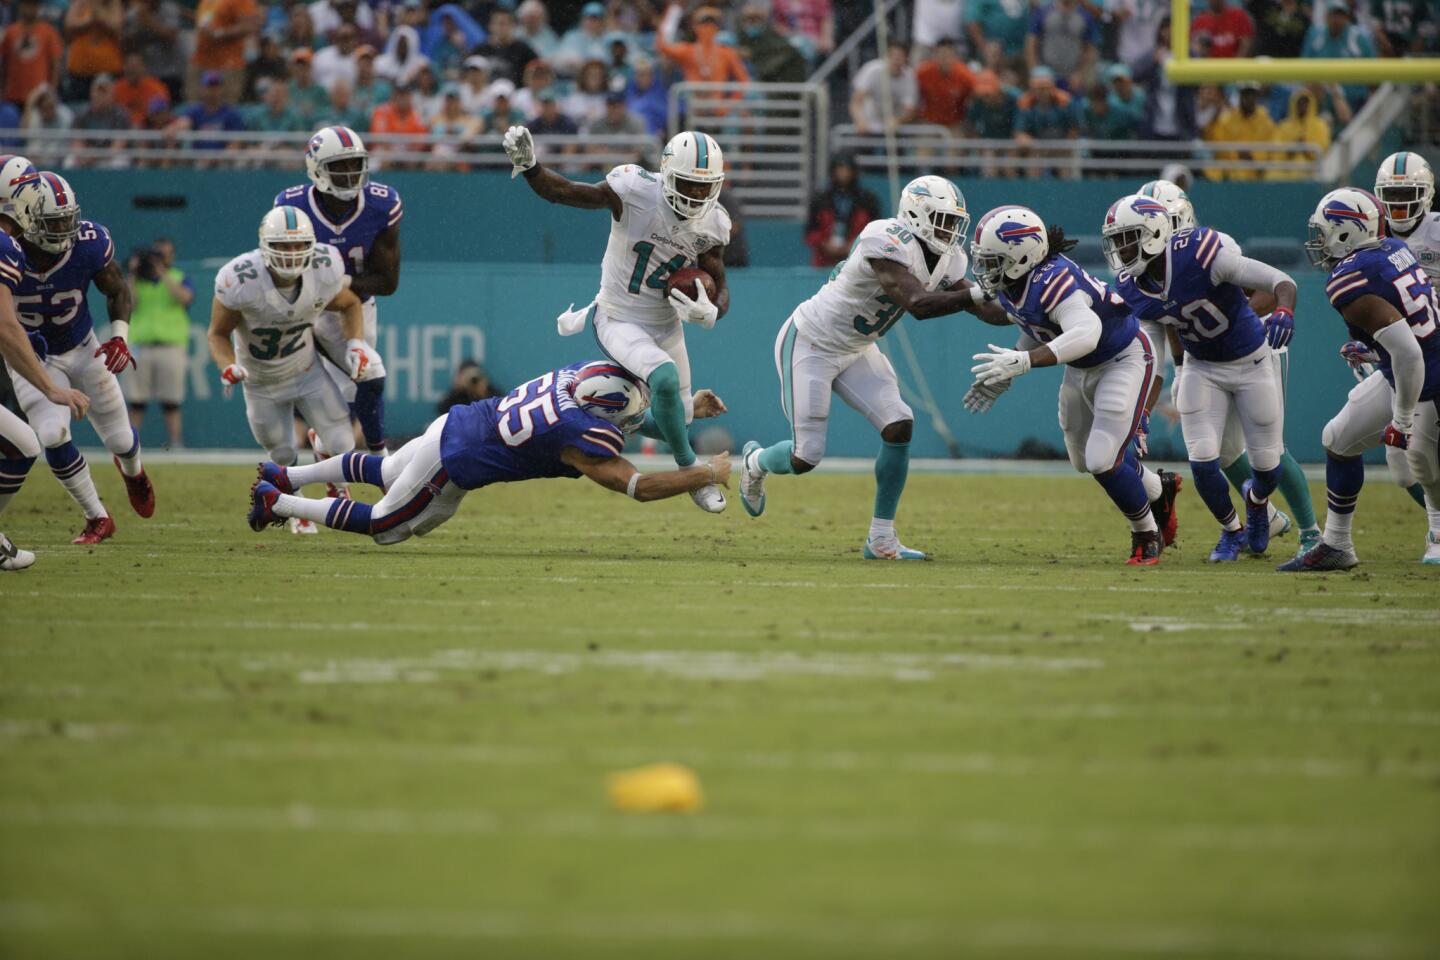 Jarvis Landry picked up kickoff-return duty (to go with punt returns), and that is dangerous business